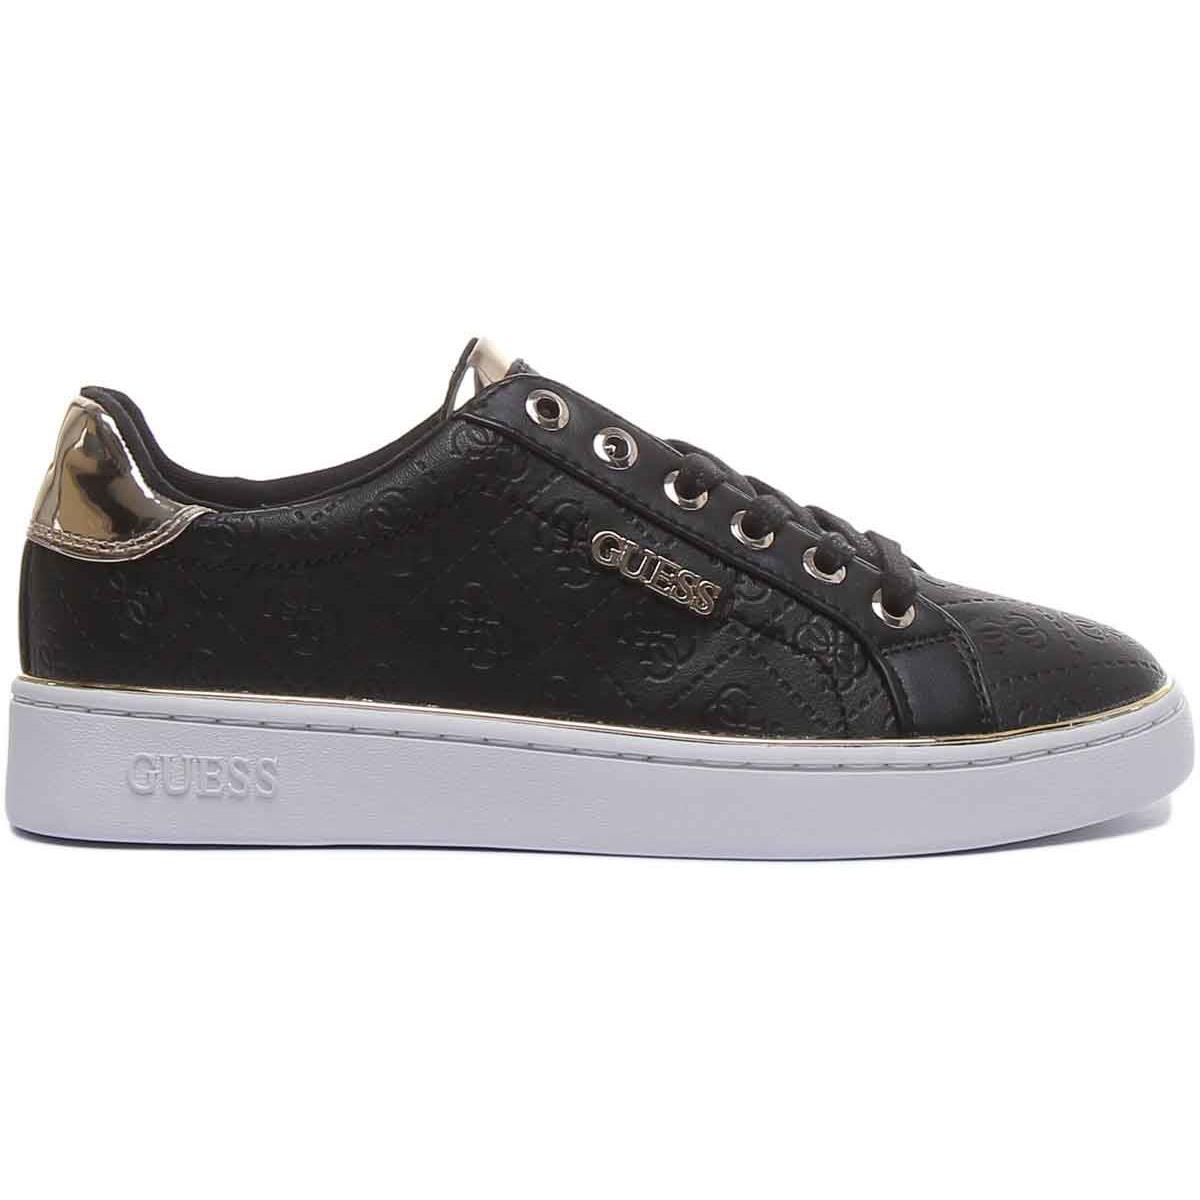 Guess Fl5Bekfal12 Beckie Womens Lace Up Sneaker with Gold Logo Size US 5 - 11